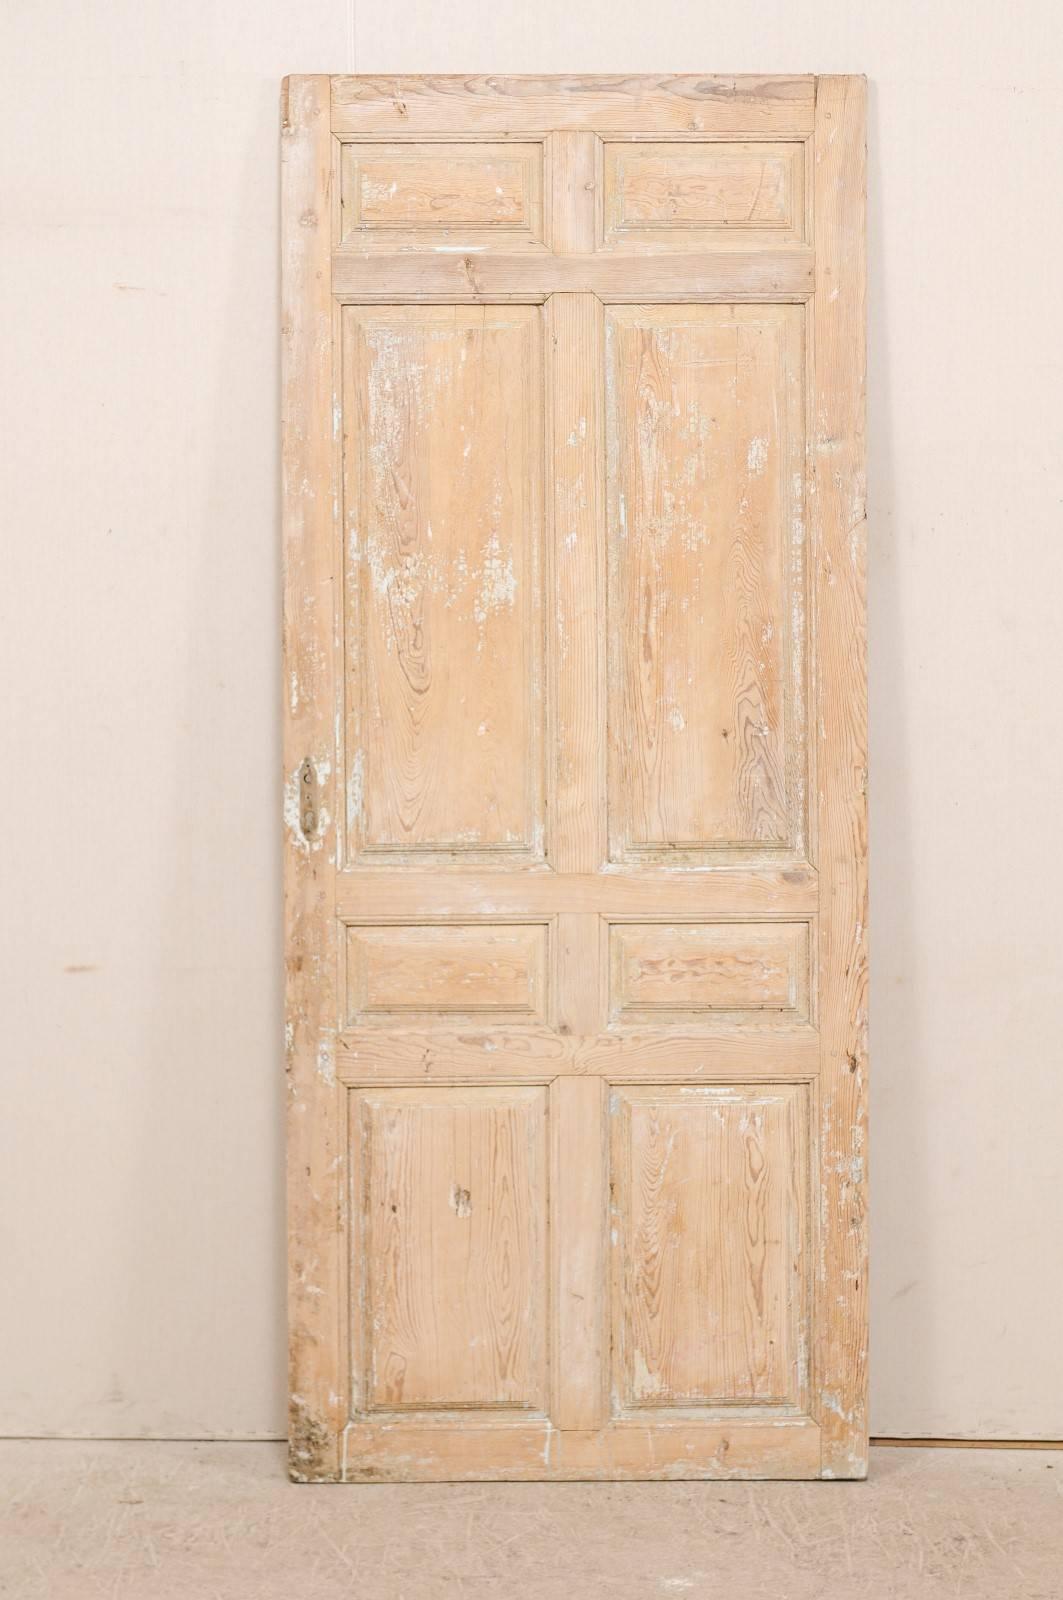 A single 19th century, French eight-panel wood door. This antique French door has eight recessed panels on both door sides, which alternate between smaller and longer rectangular shaped panels. The door has a natural wood finish with traces of old